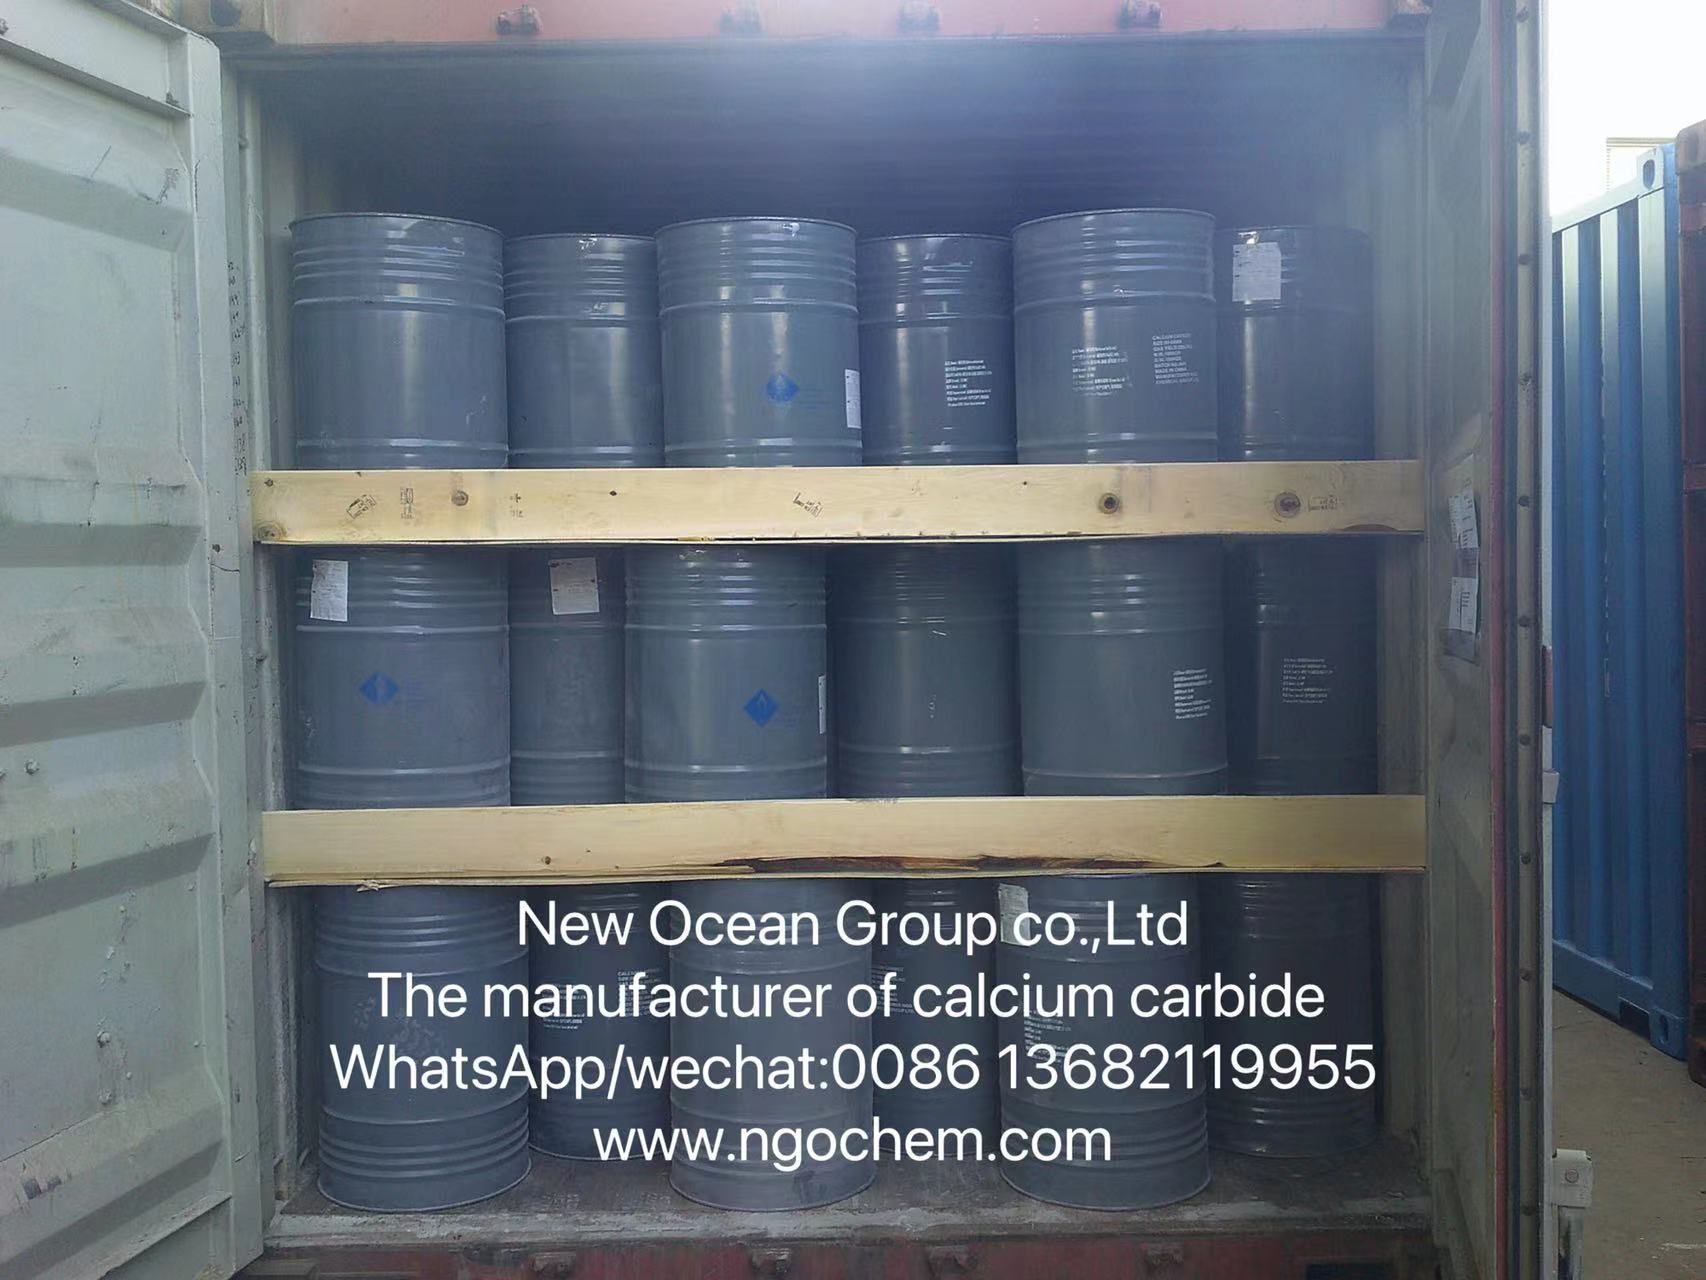 On November 8, the factory price of northwest calcium carbide was temporarily stable